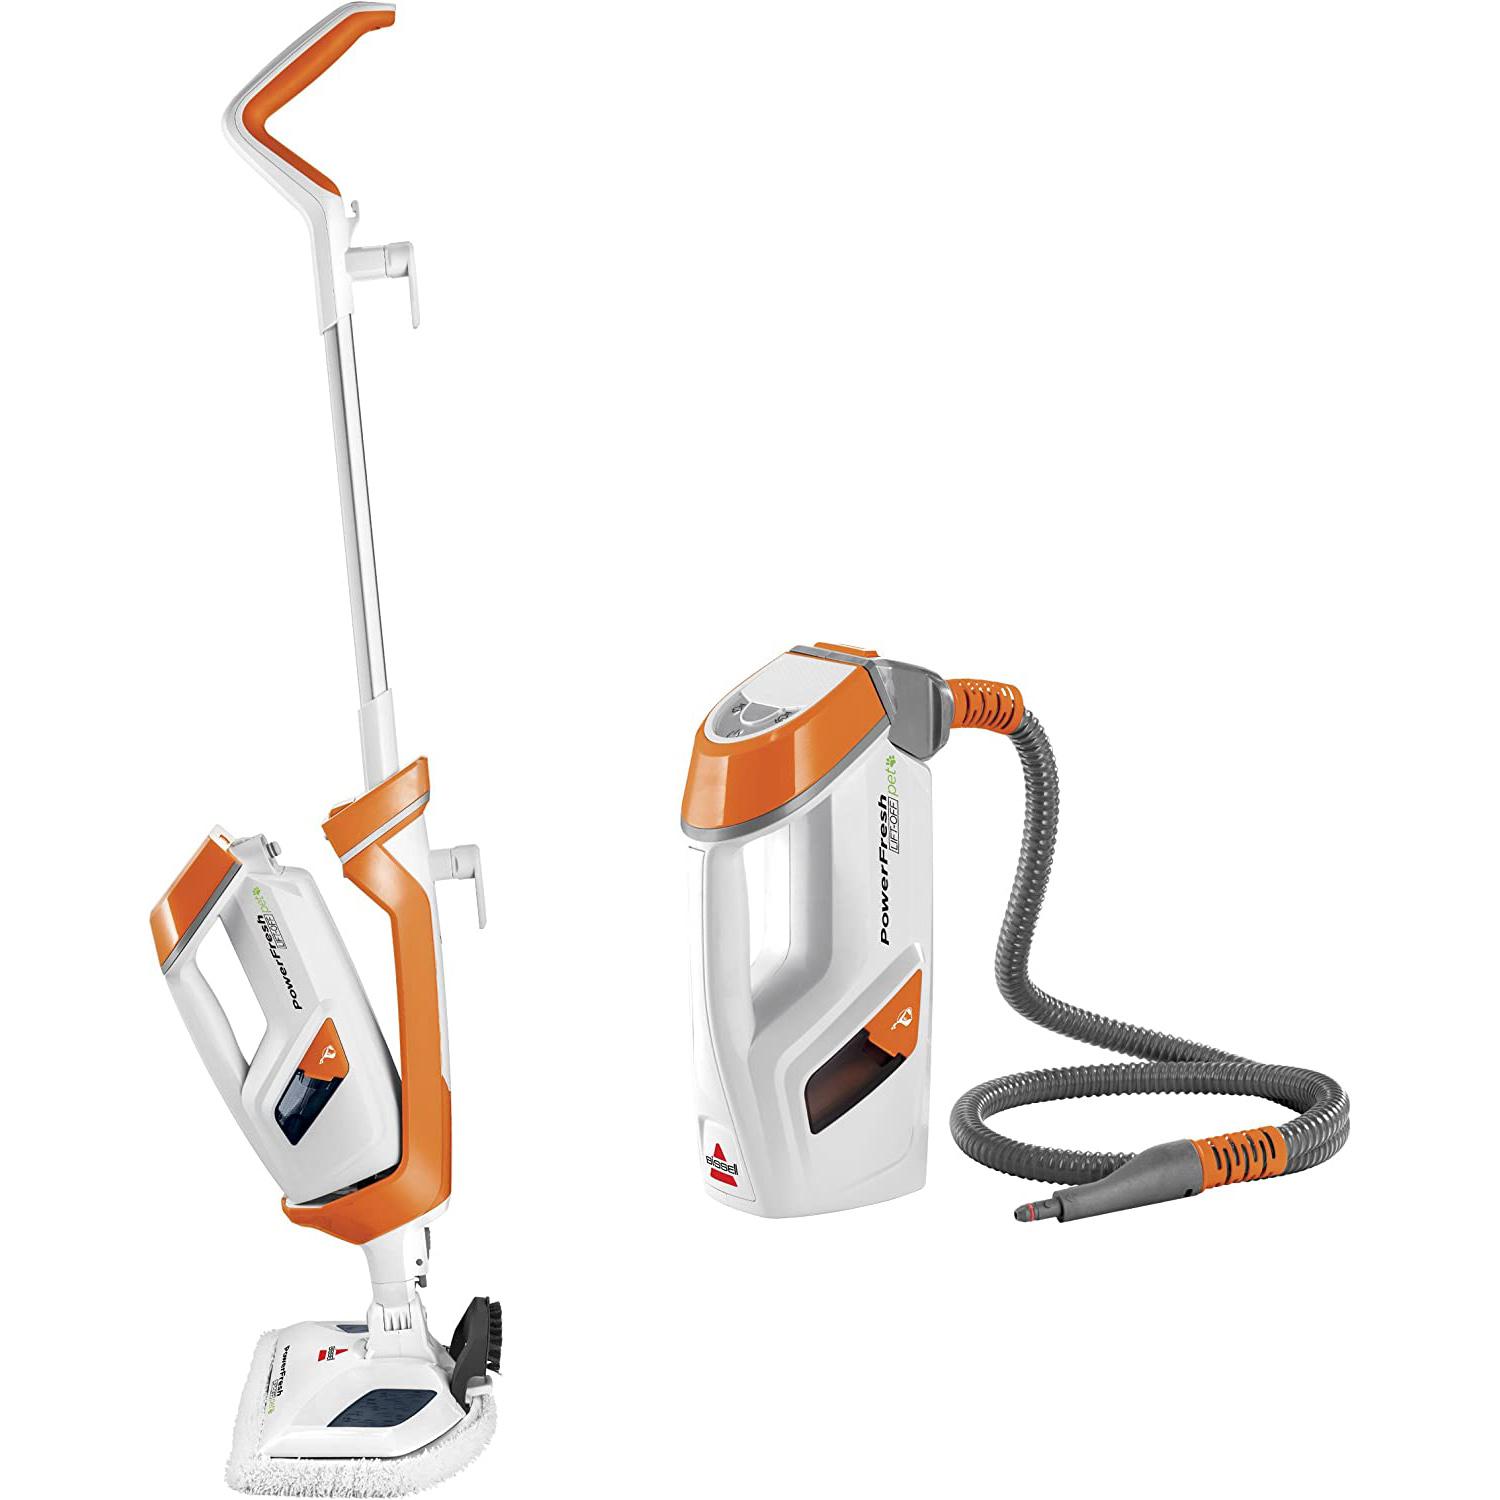 Bissell PowerFresh Lift-Off Pet 2-in-1 Scrubbing Steam Mop for $97 Shipped